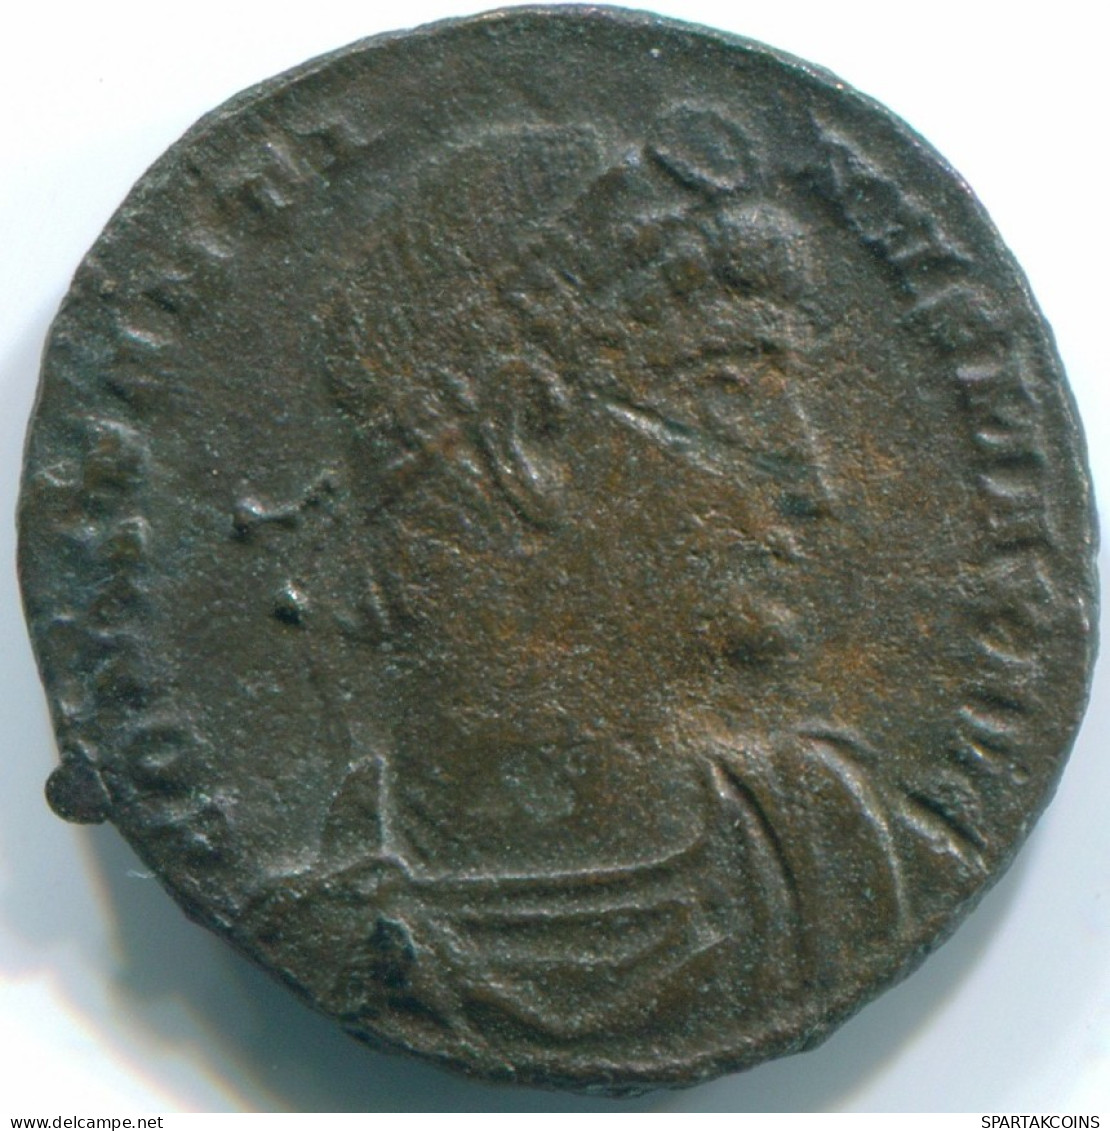 CONSTANTINUS I MAGNUS Two Soldier Standing 2.30g/17.54mm #ROM1016.8.D.A - El Imperio Christiano (307 / 363)